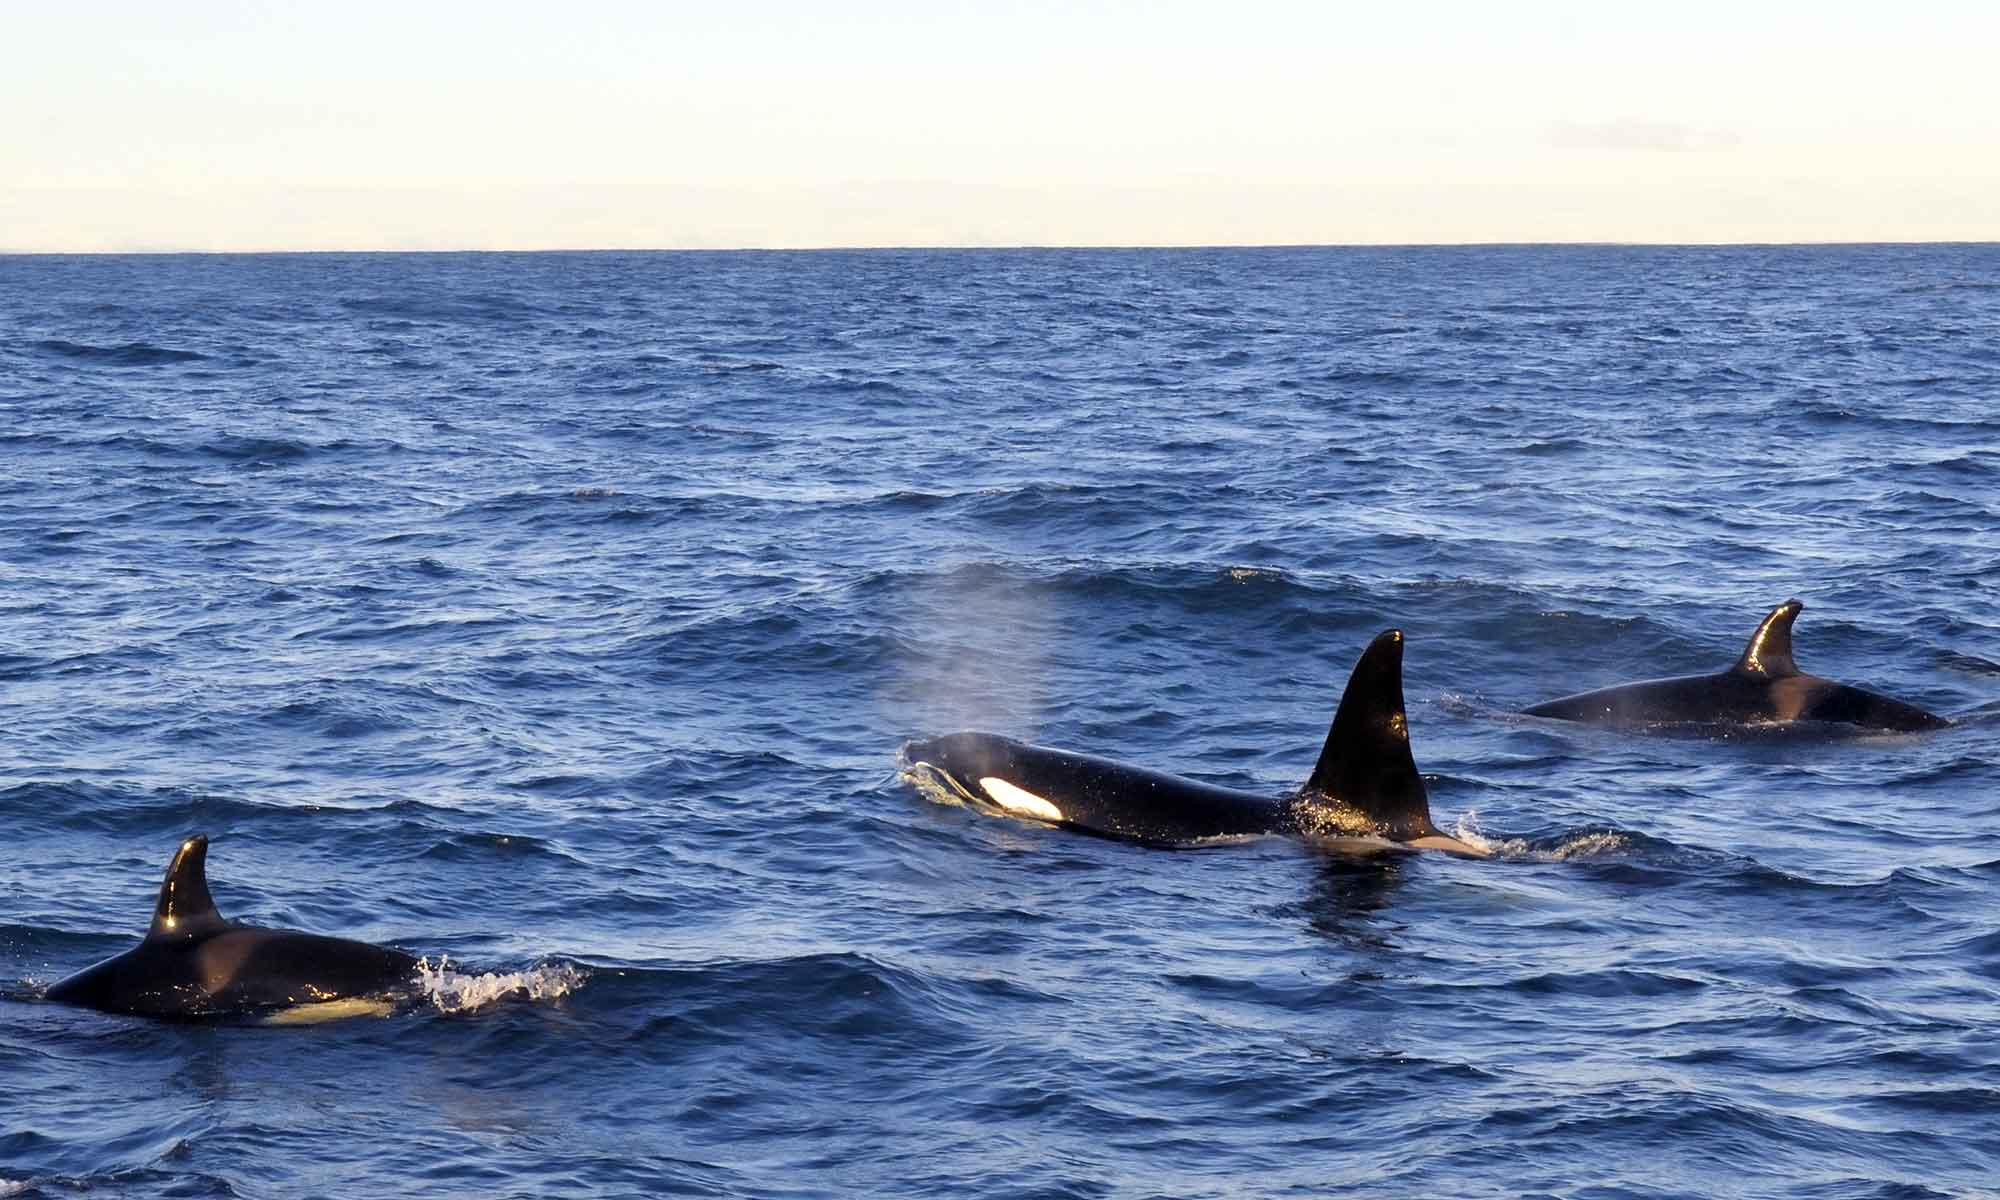 The Orca or Killer whale is an oceanic dolphin species rarely seen on Madeira whale watching tours.